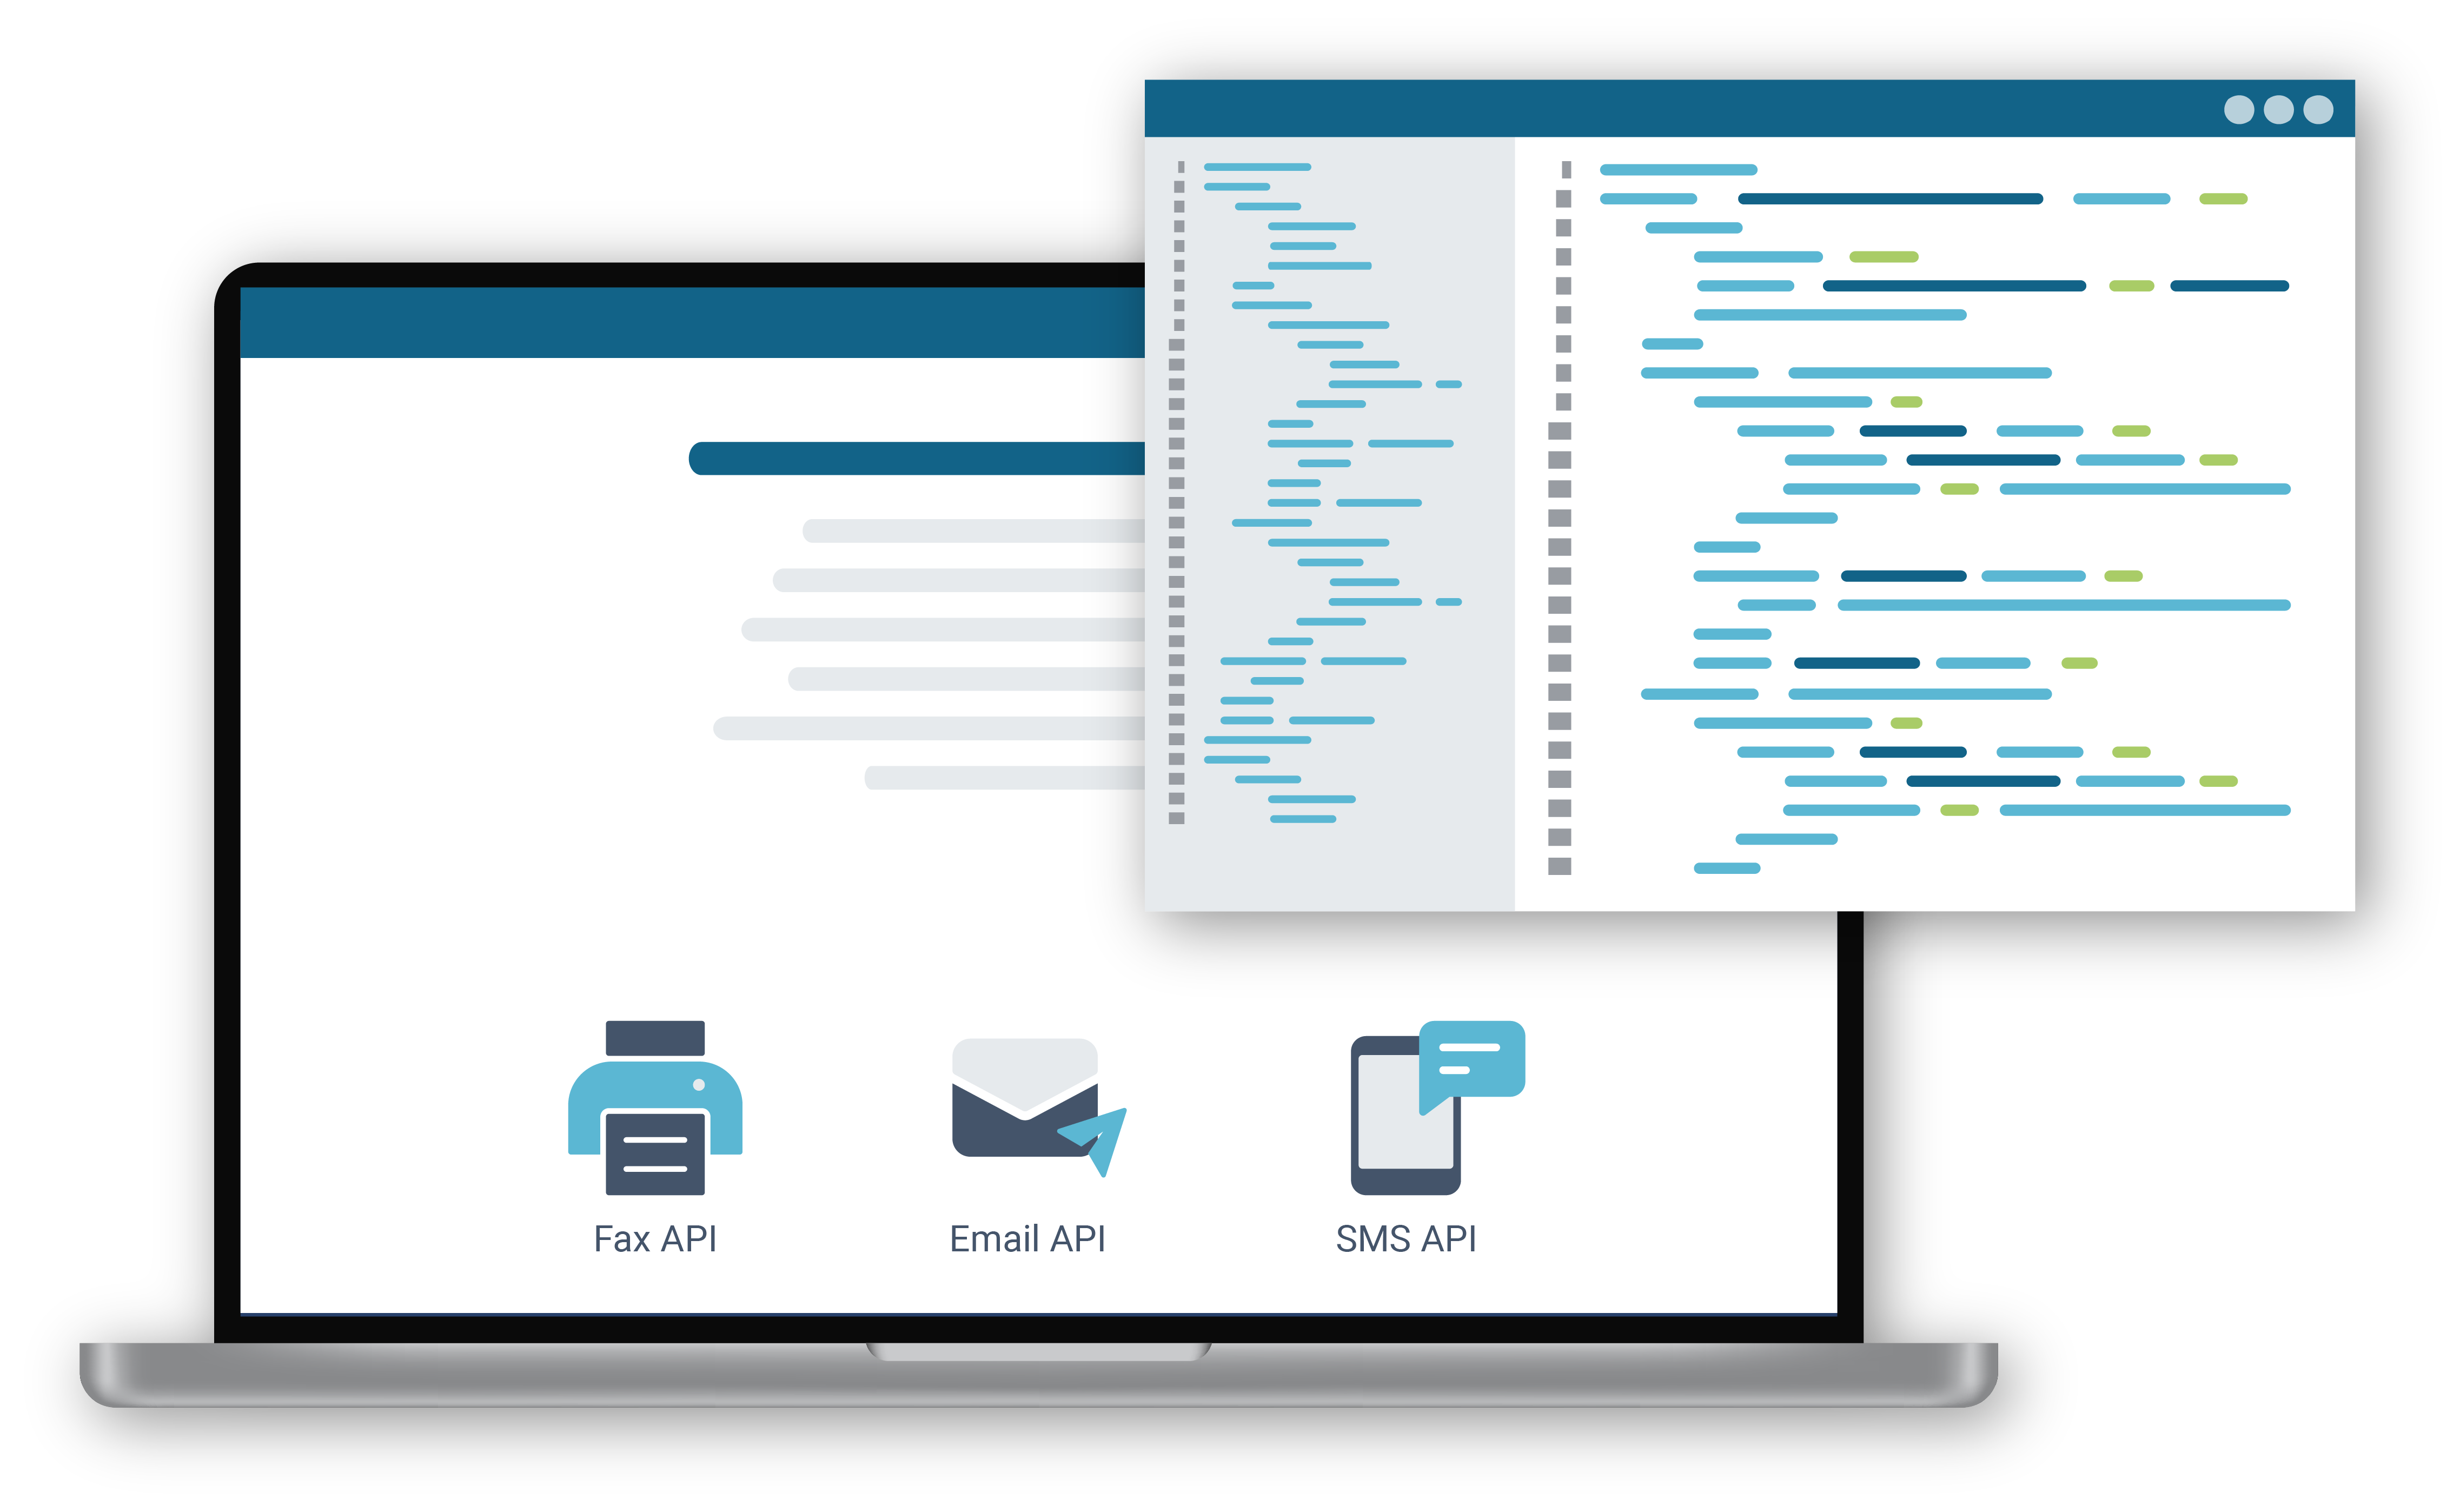 Graphic: Developer Portal for SMS, Email and Fax API